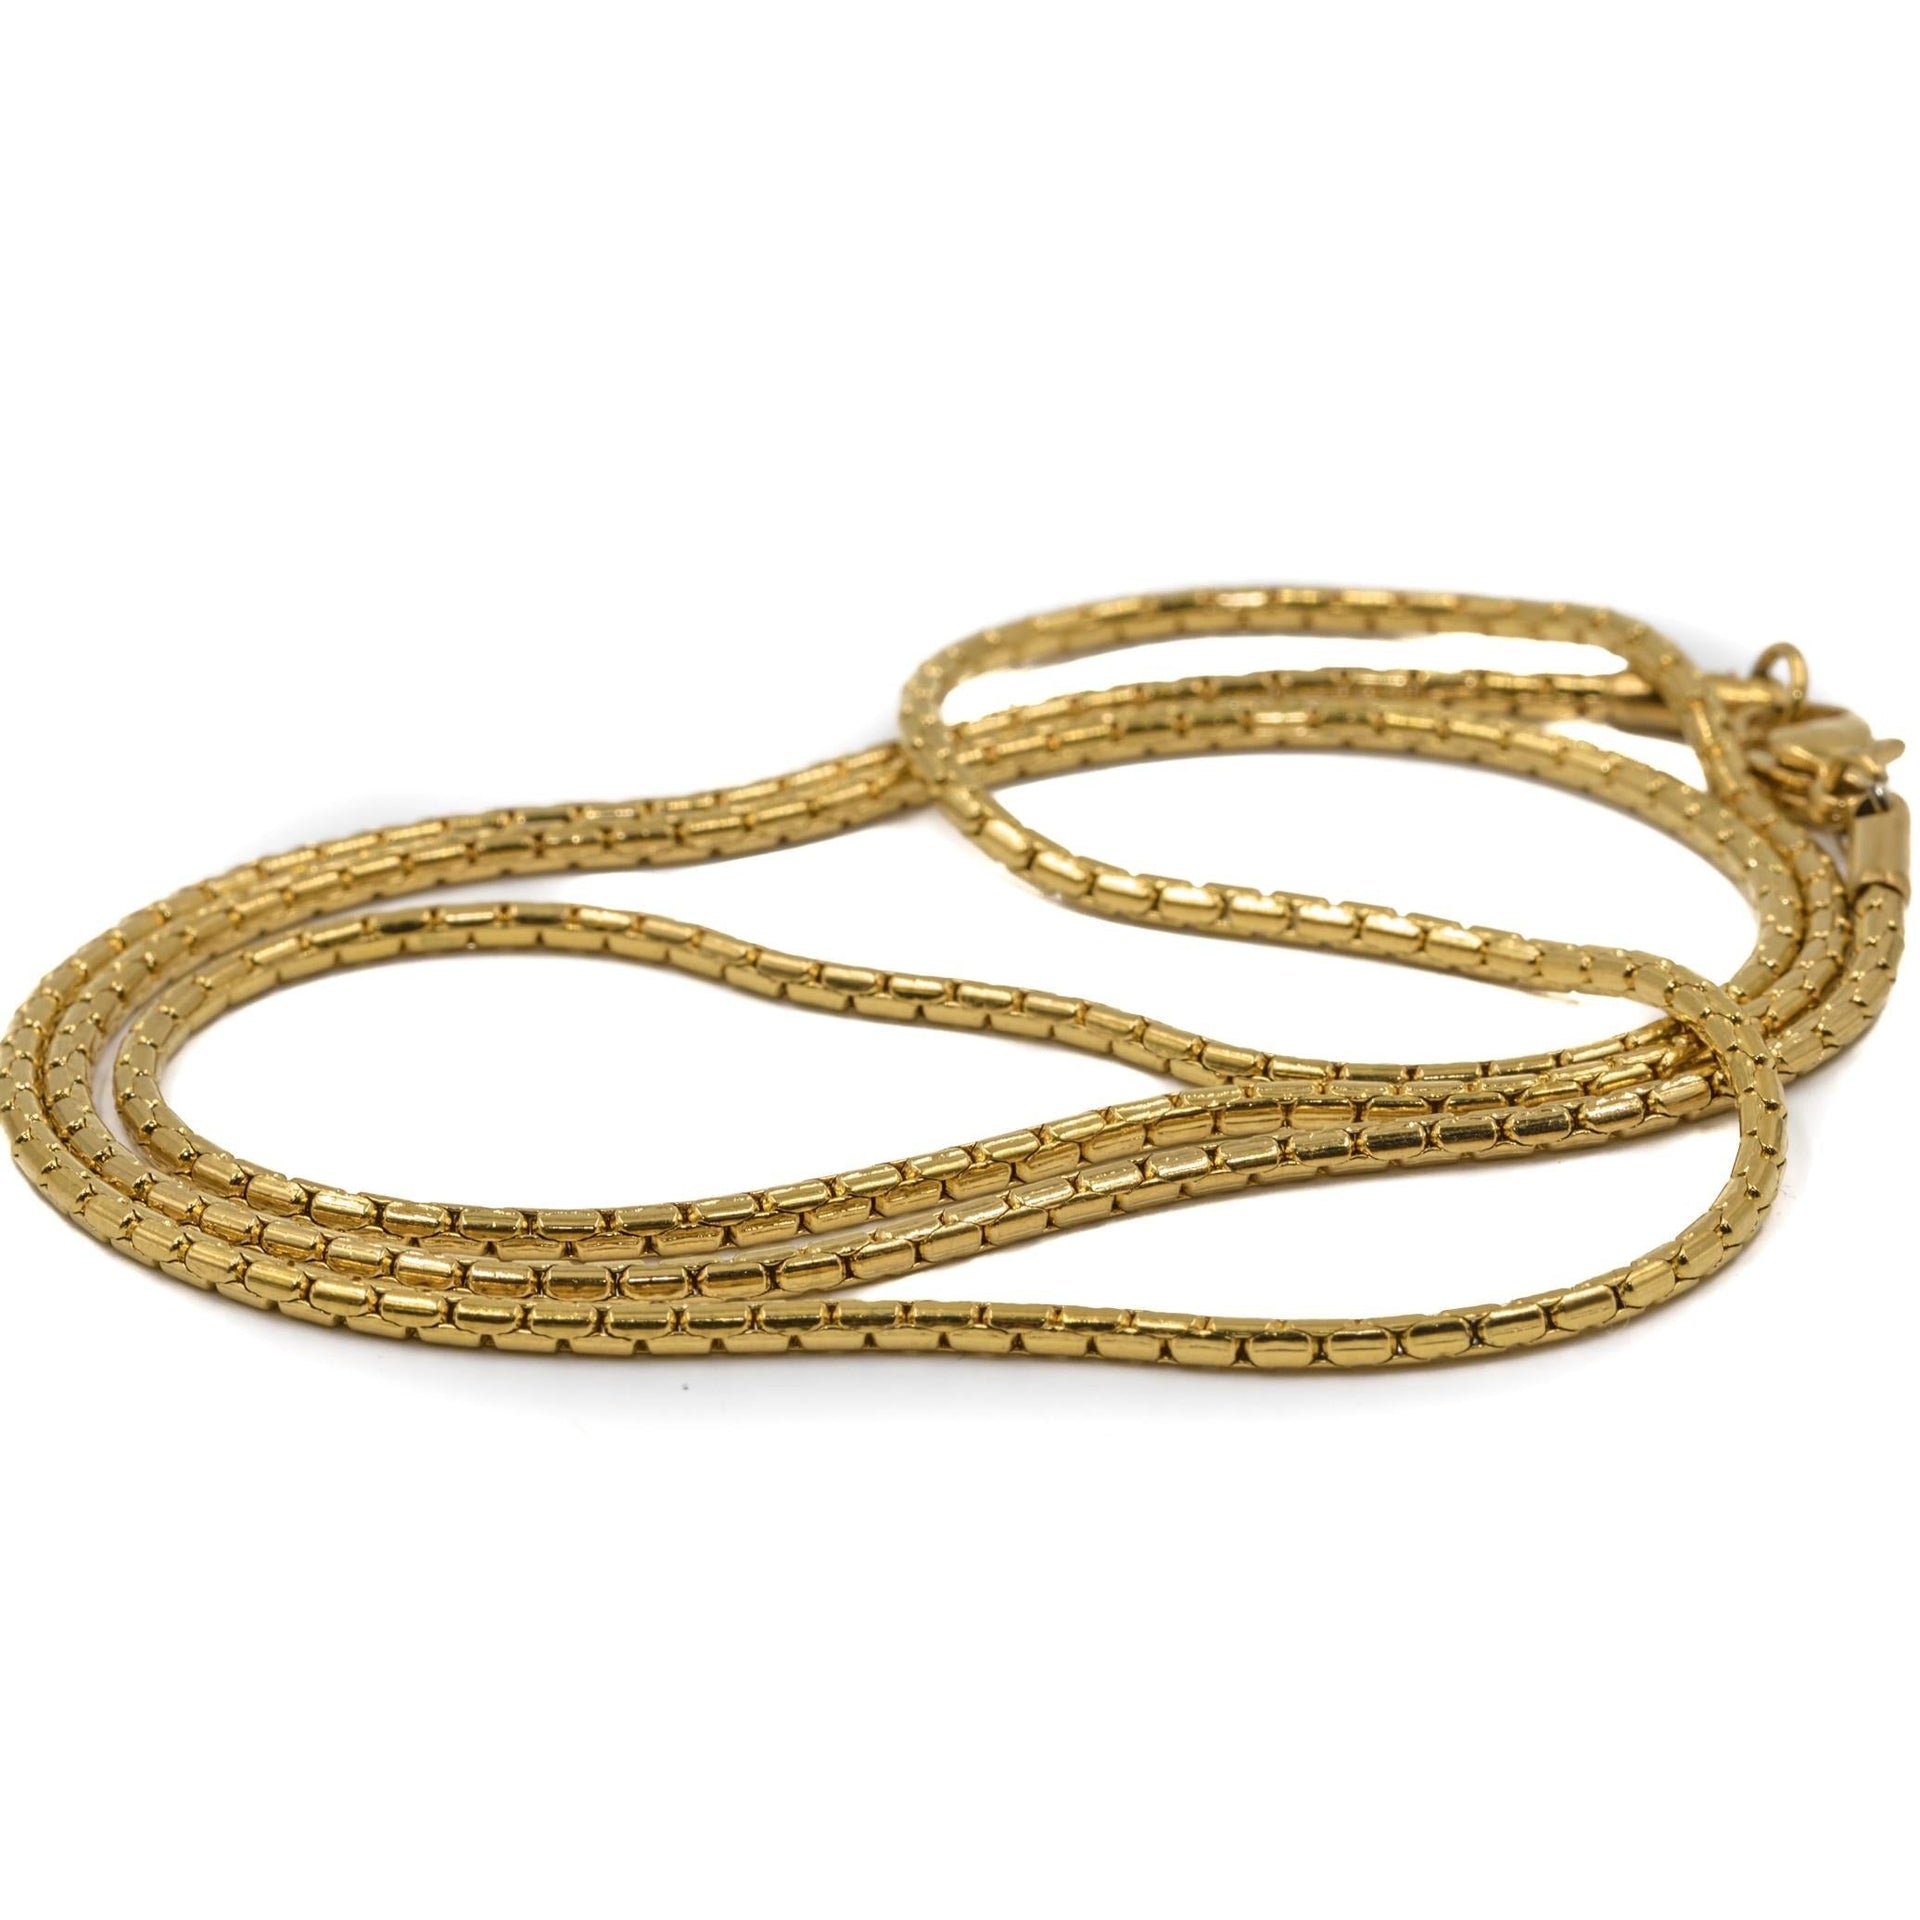 GOLDEN GILT | REPLACEMENT CHAIN | 18K GOLD PLATED |